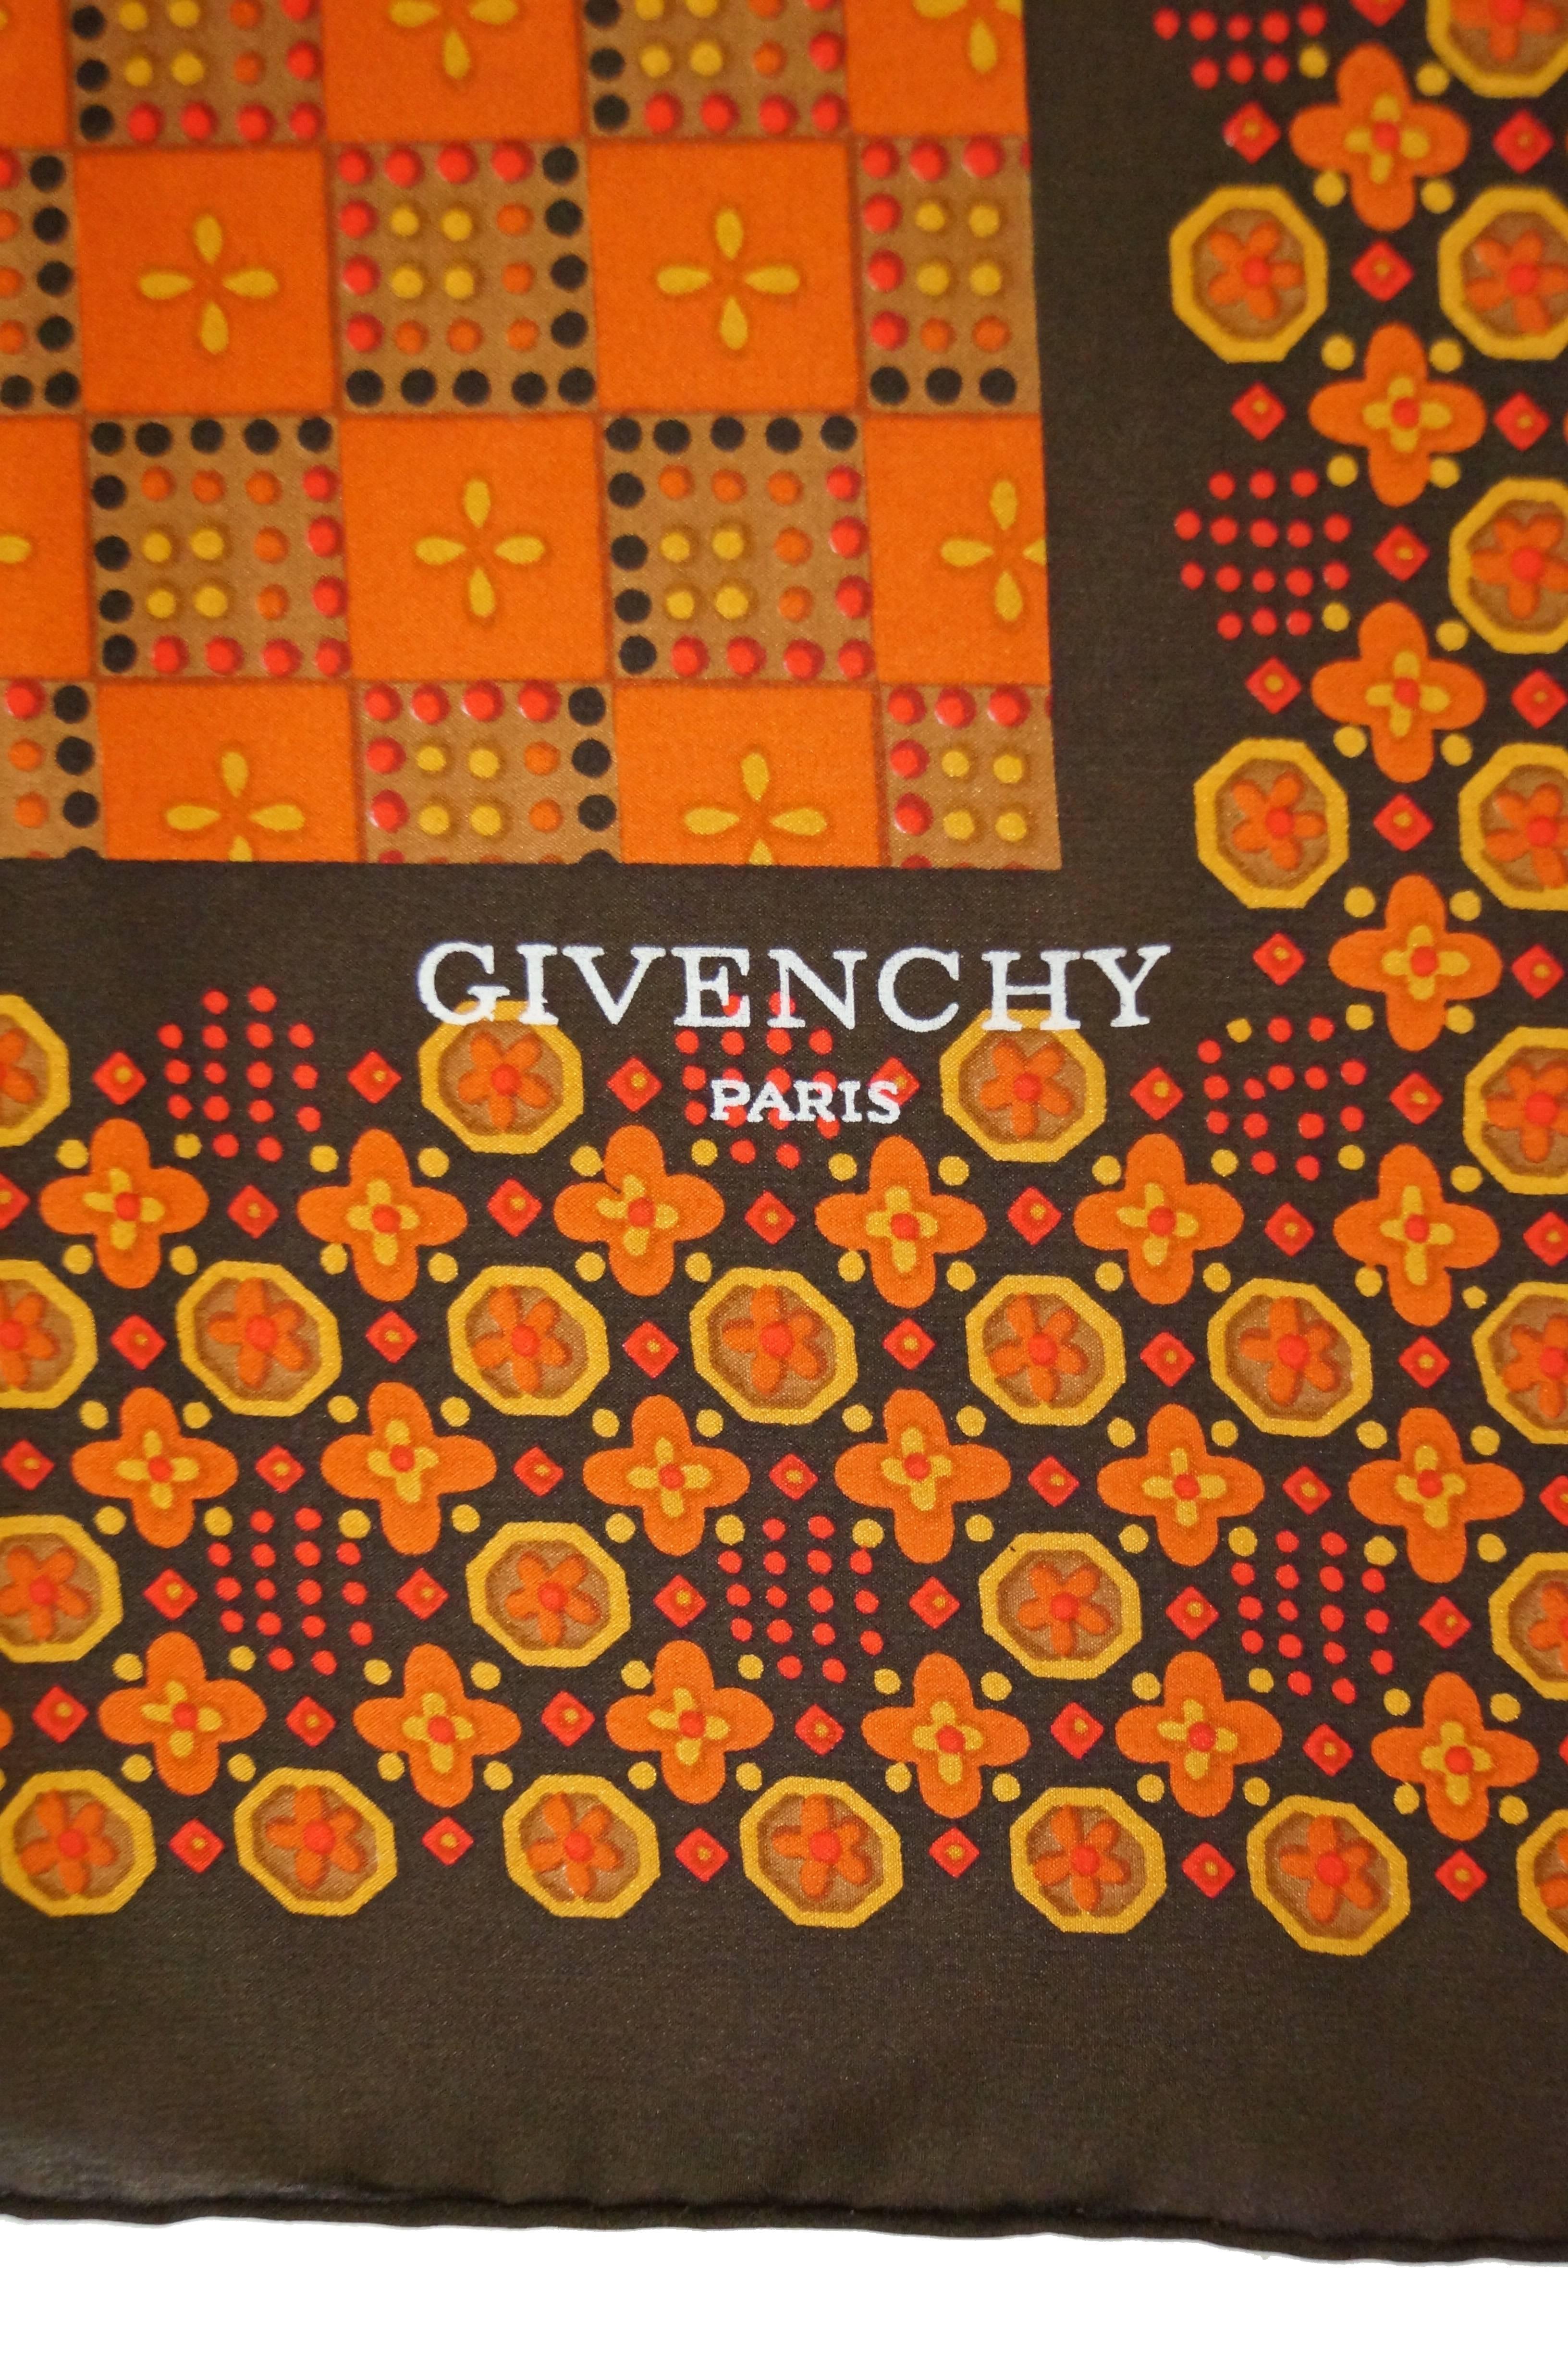 Beautiful large square silk scarf by Givenchy. The scarf has a mostly orange center with a wide brown - orange border. The scarf features geometric patterns incorporating floral elements. 